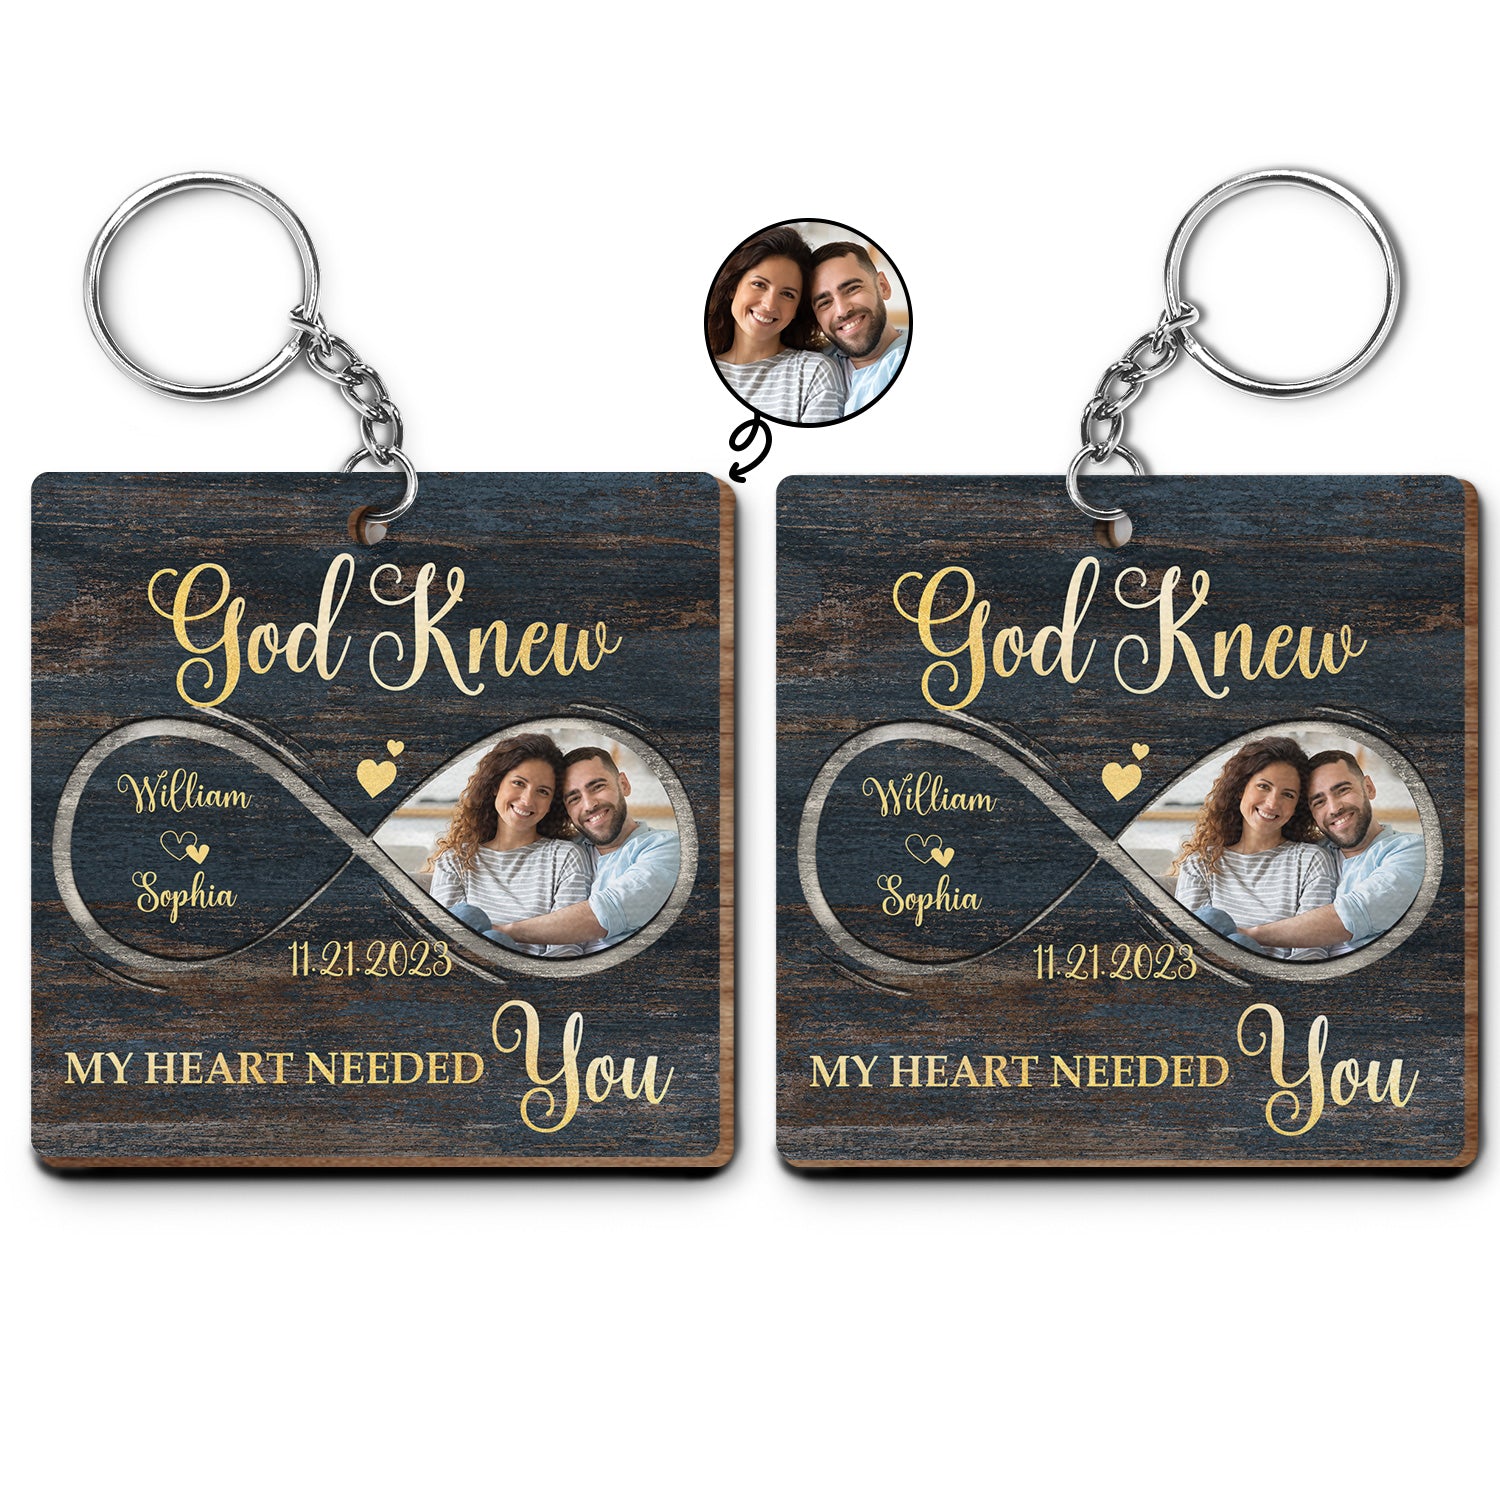 Custom Photo Couple My Heart Needed You - Anniversary Gift For Couples, Spouse, Lovers, Wife, Husband, Girlfriend, Boyfriend - Personalized Wooden Keychain